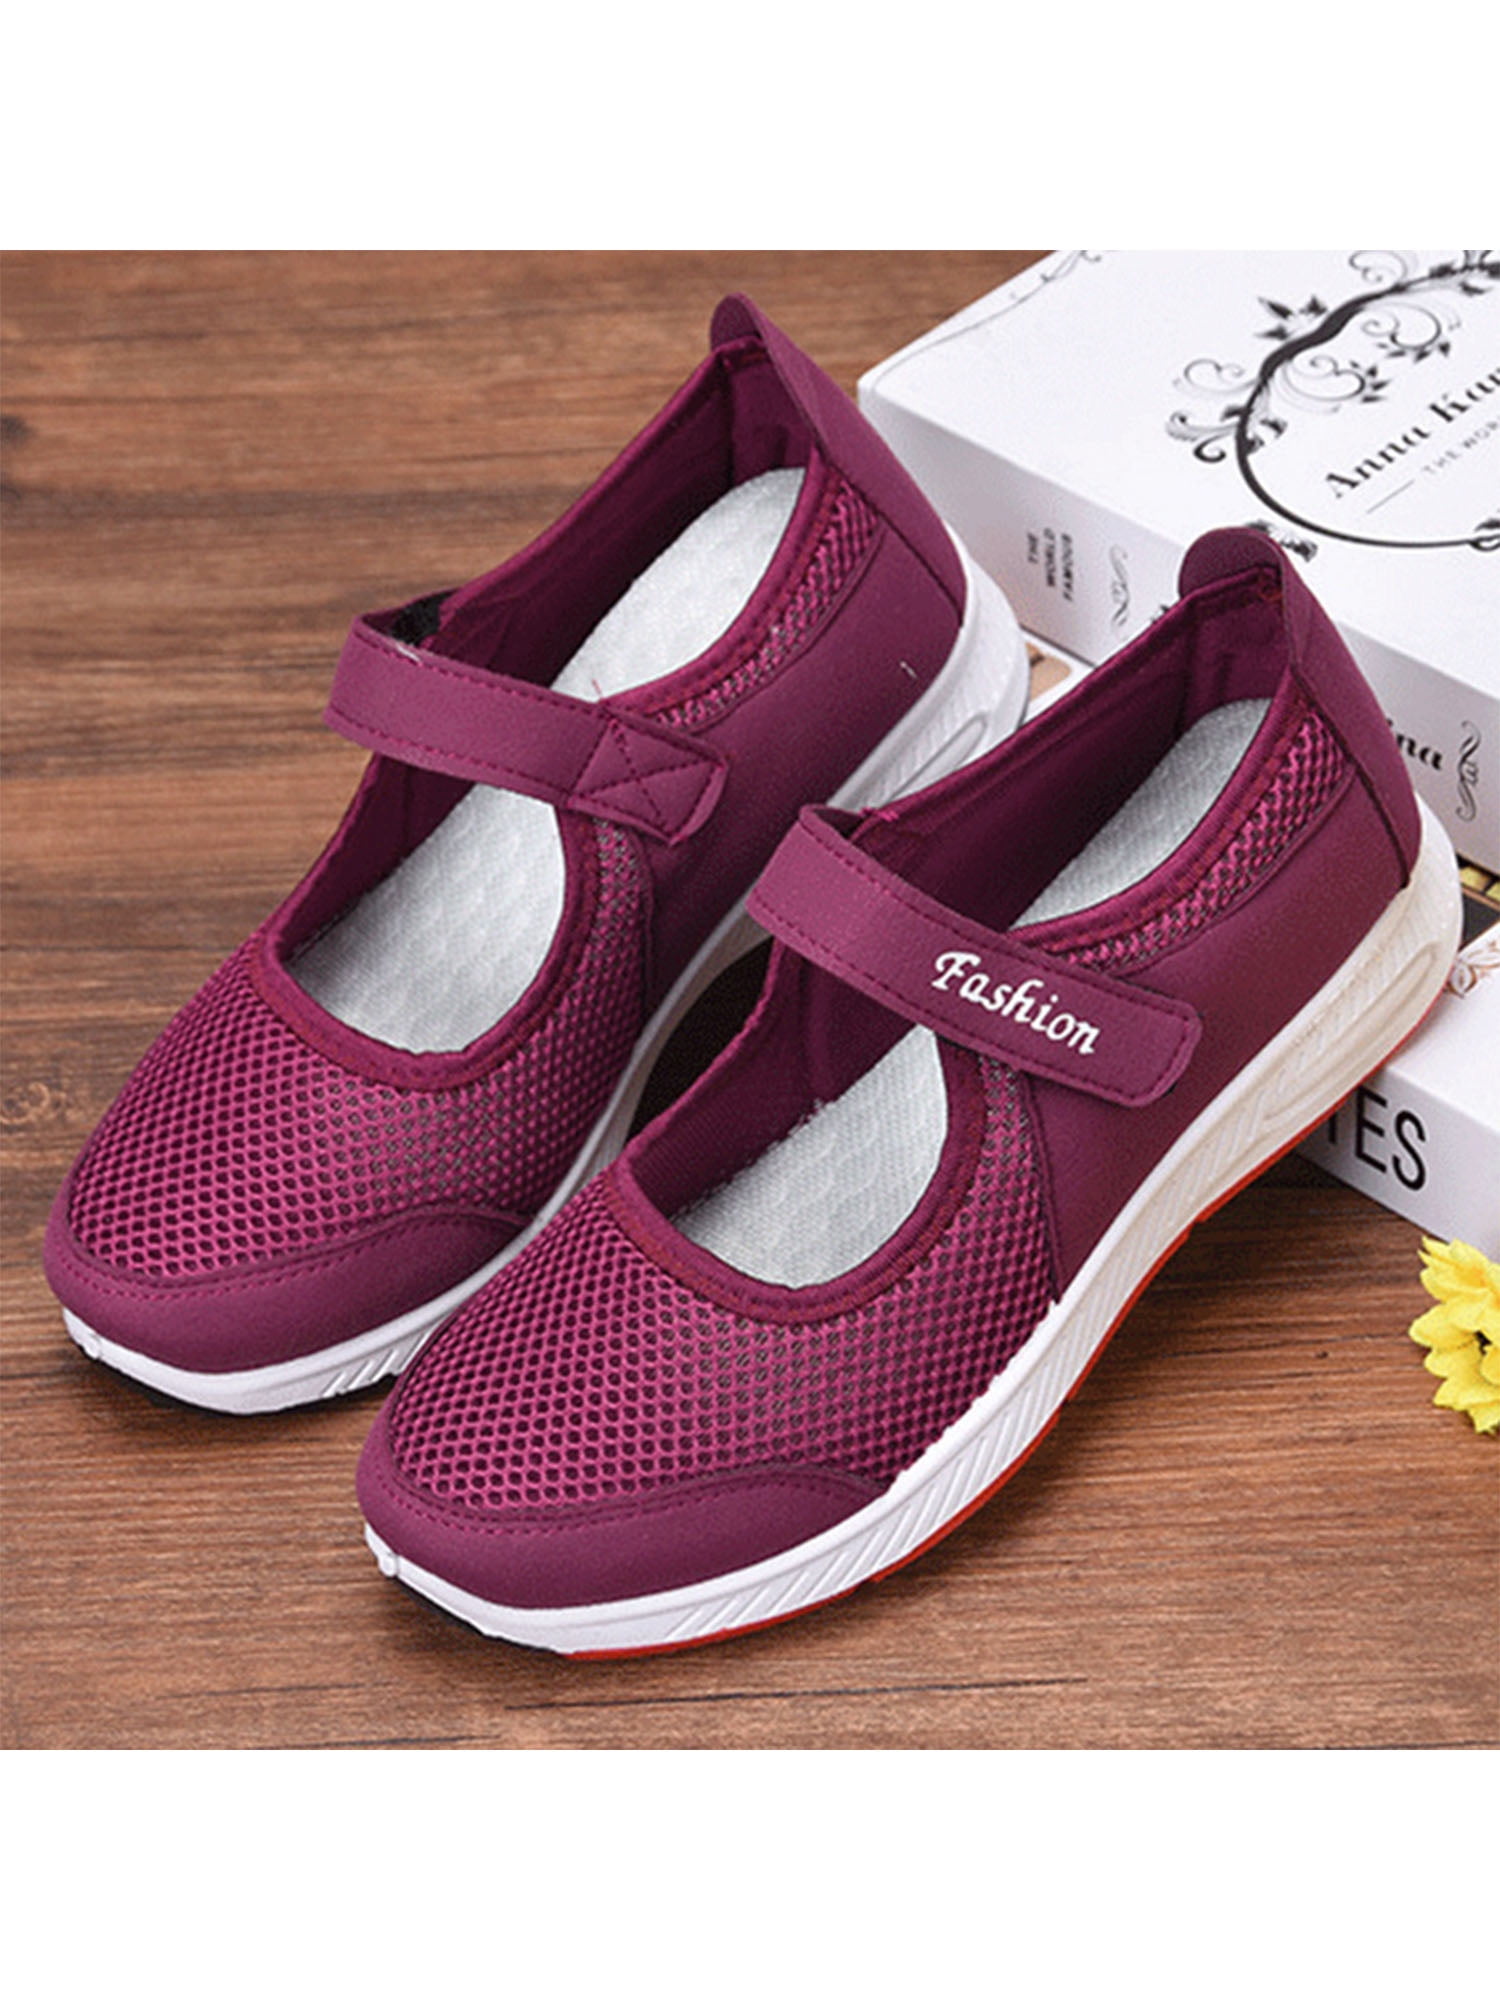 Hotter Women's Flow Wide Fit Mary Jane Shoe Textile Slip on Adult Casual Trainer 